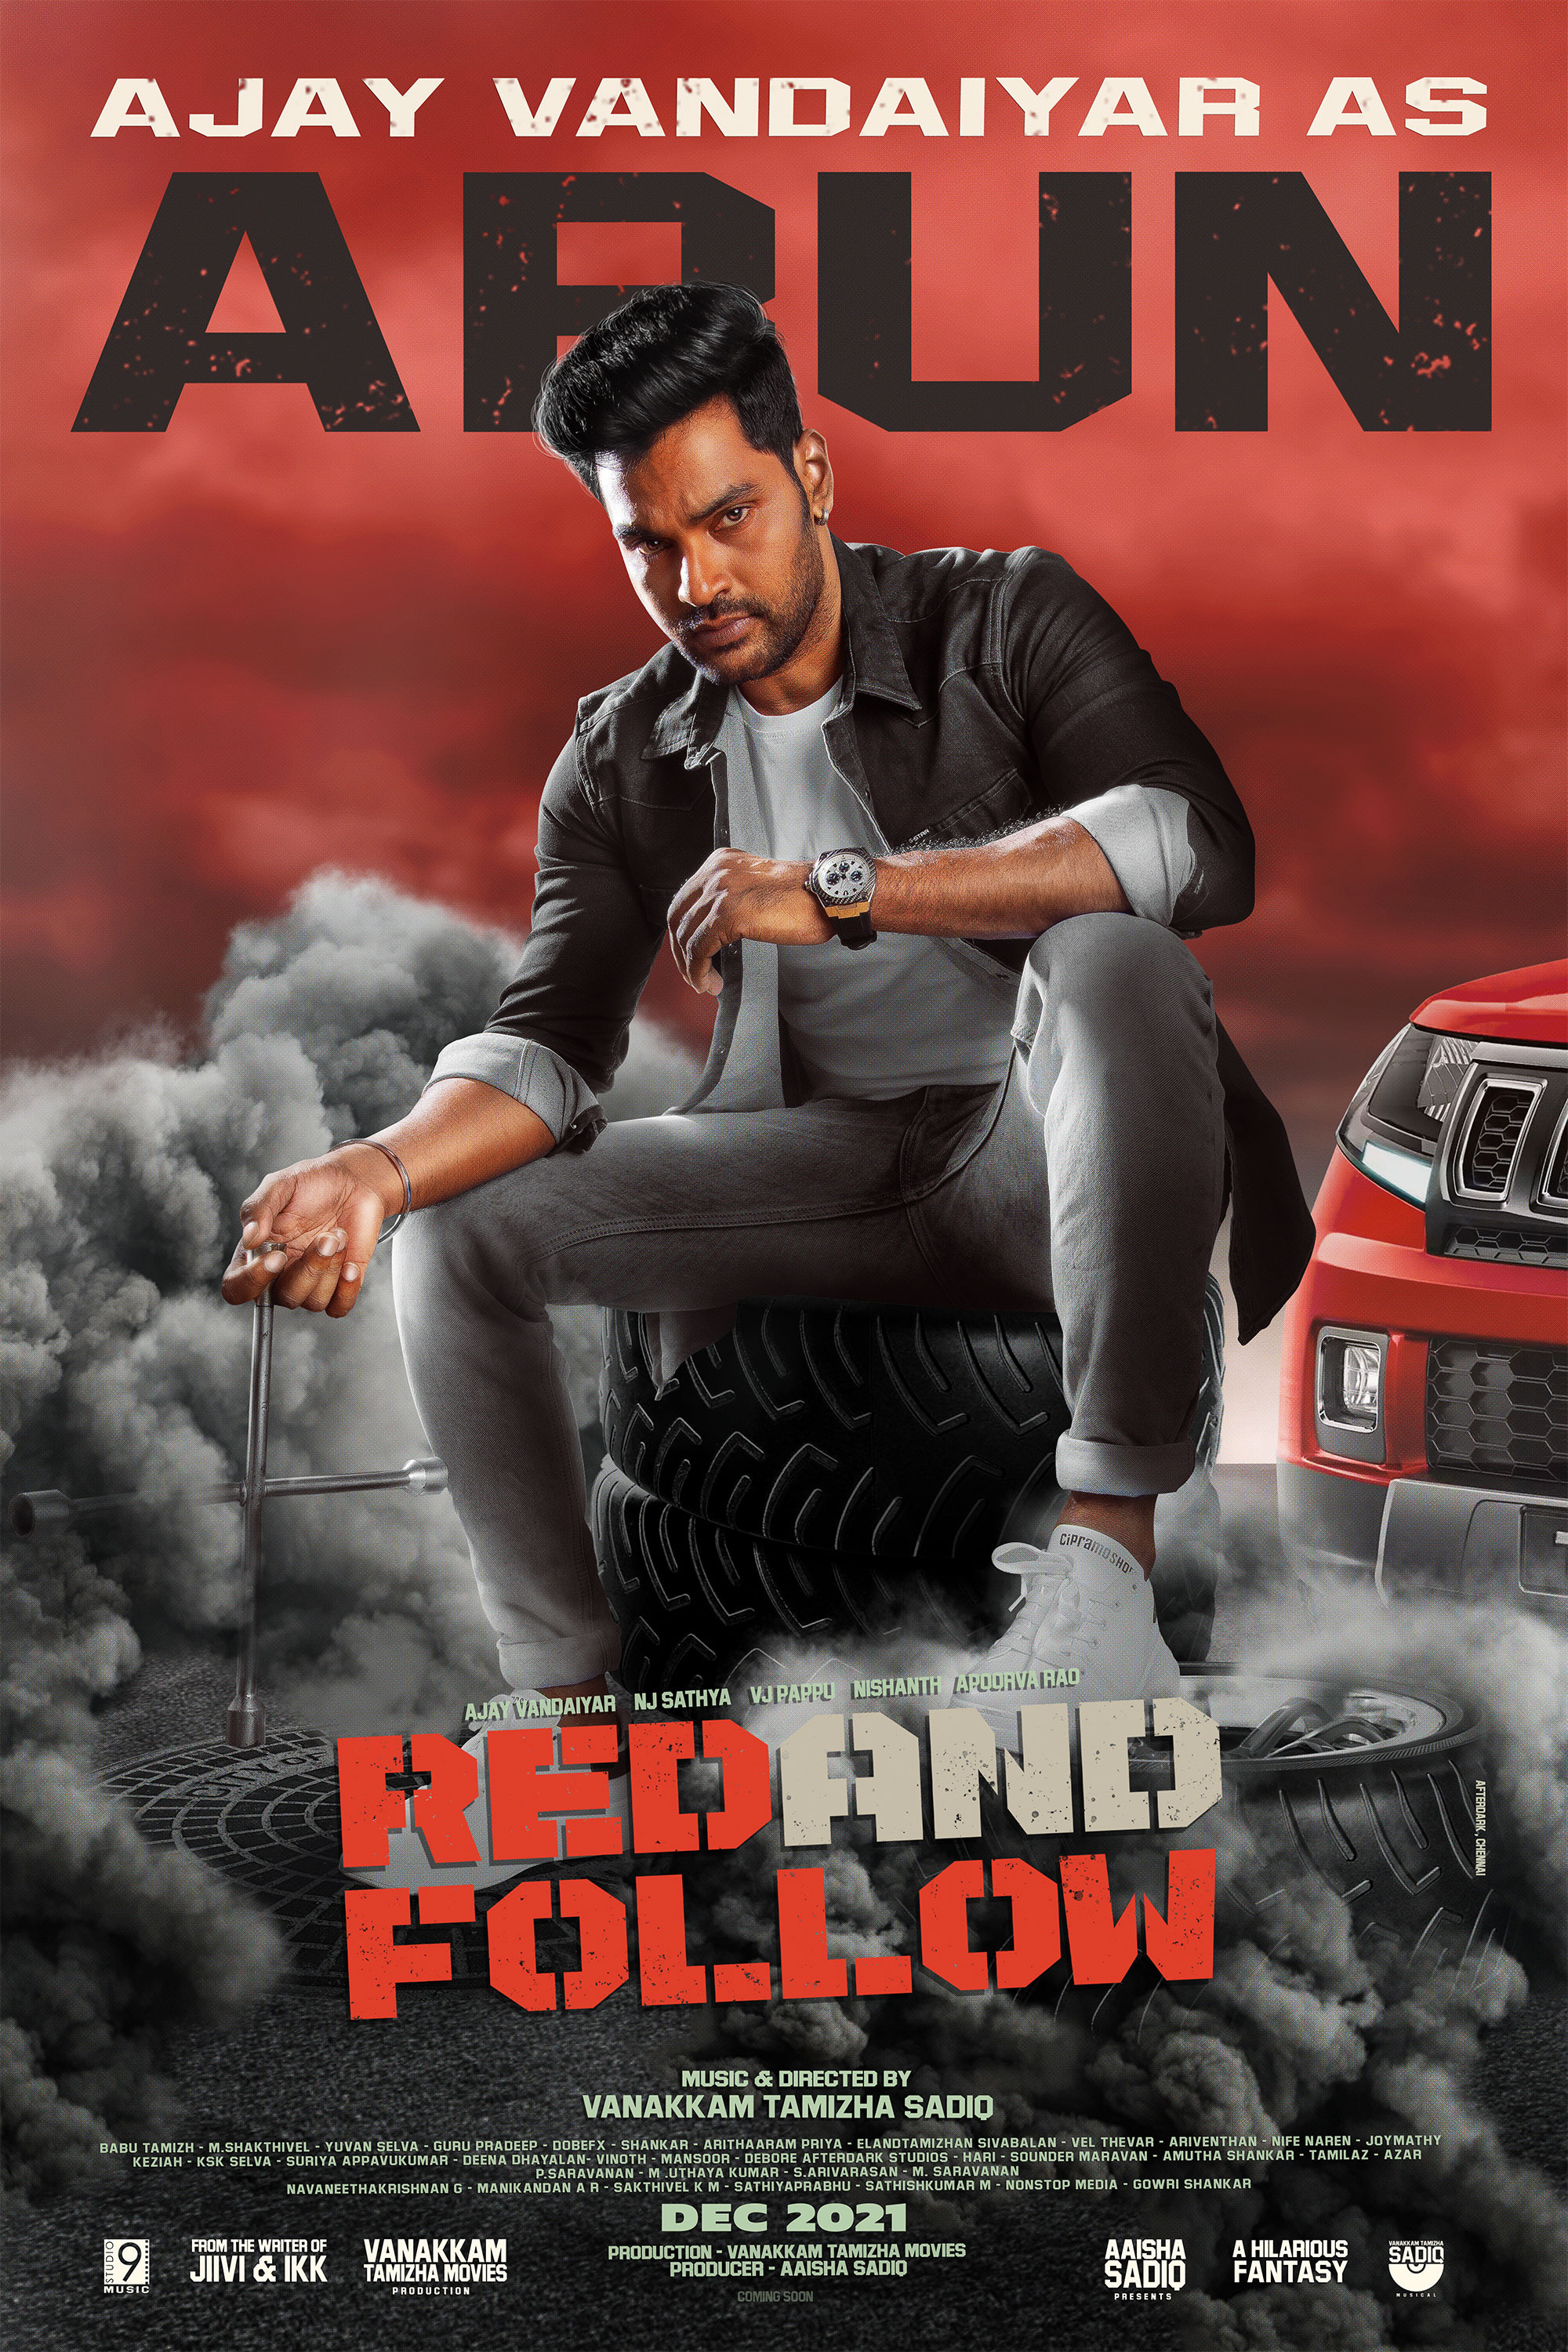 Mega Sized Movie Poster Image for Red and Follow (#5 of 6)